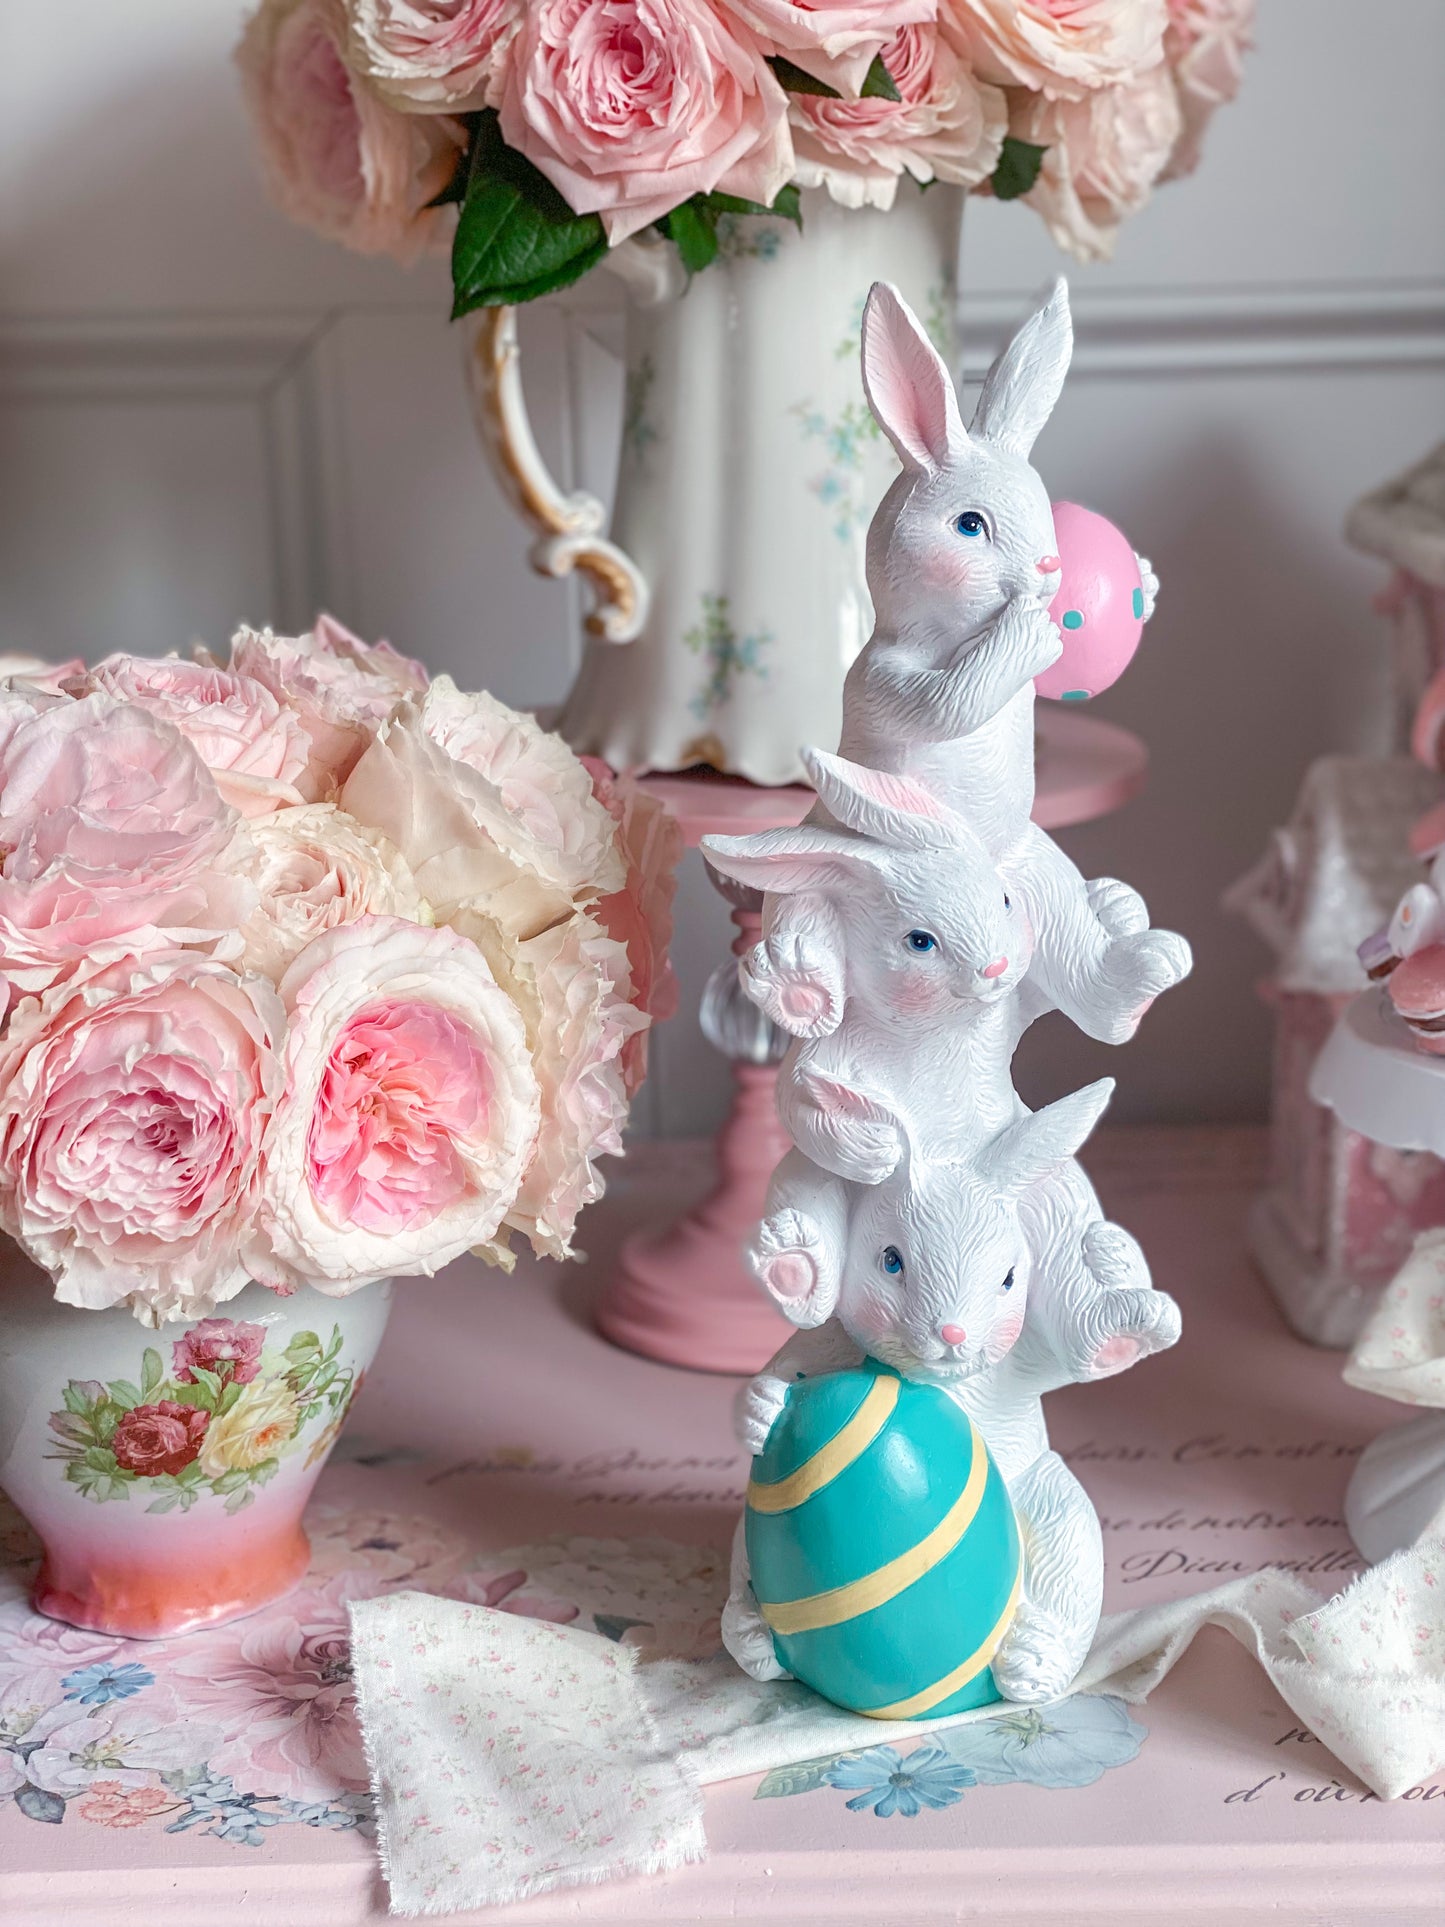 Pastel Playful Stacked Bunnies with Pink andTeal Easter Eggs